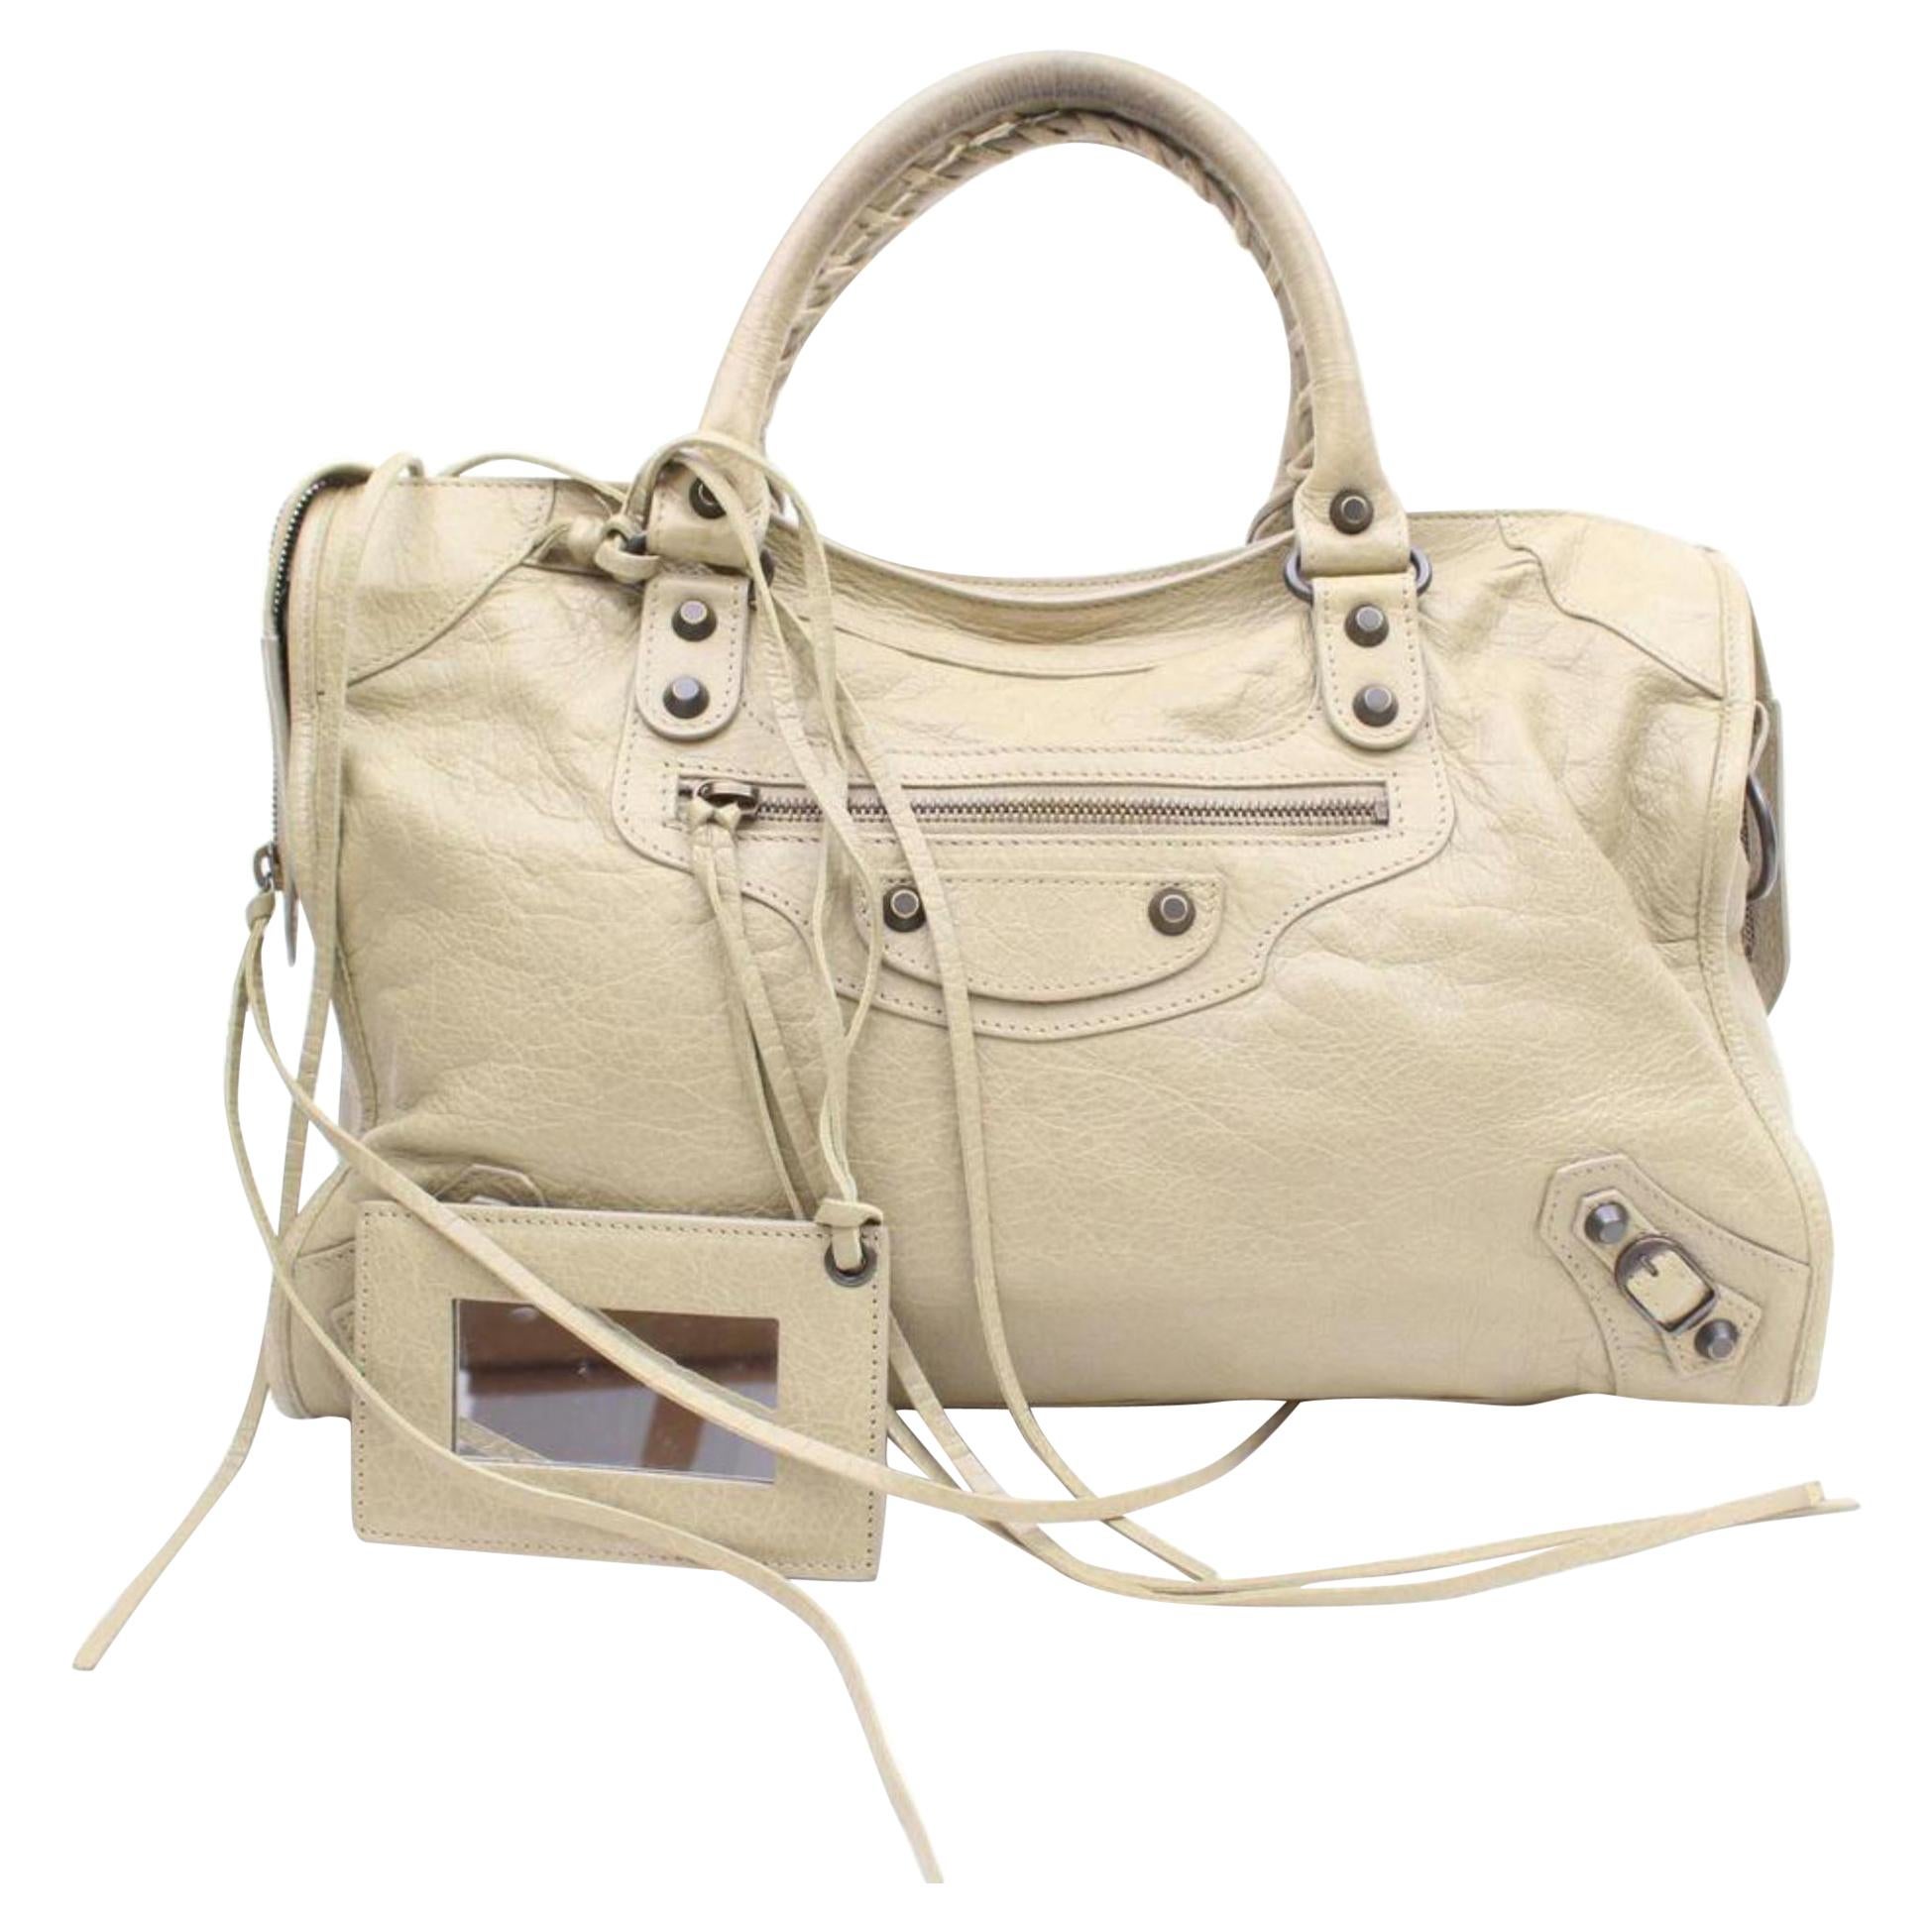 Balenciaga The City 2way 869864 Beige Leather Satchel For Sale